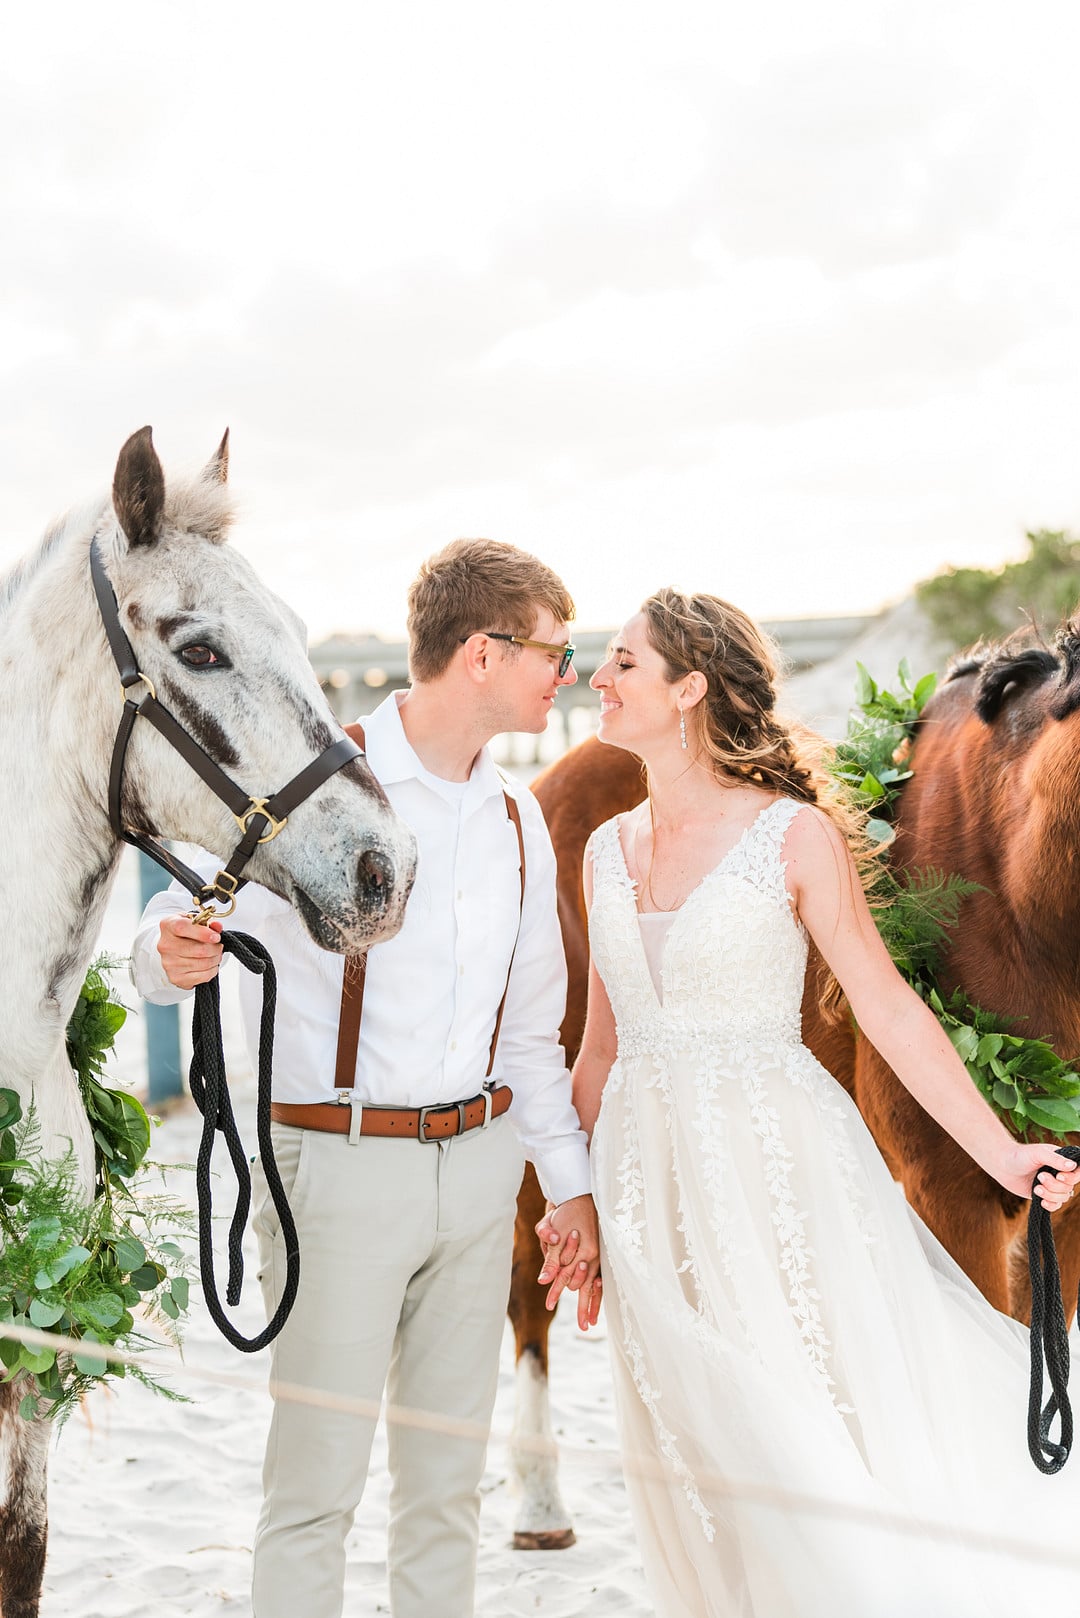 Romantic, Spring Styled Wedding with Horses on the Beach_Christine Austin Photography_©christineaustinphotography_2021_RomanticBeachStyledShoot_Horses_17_low